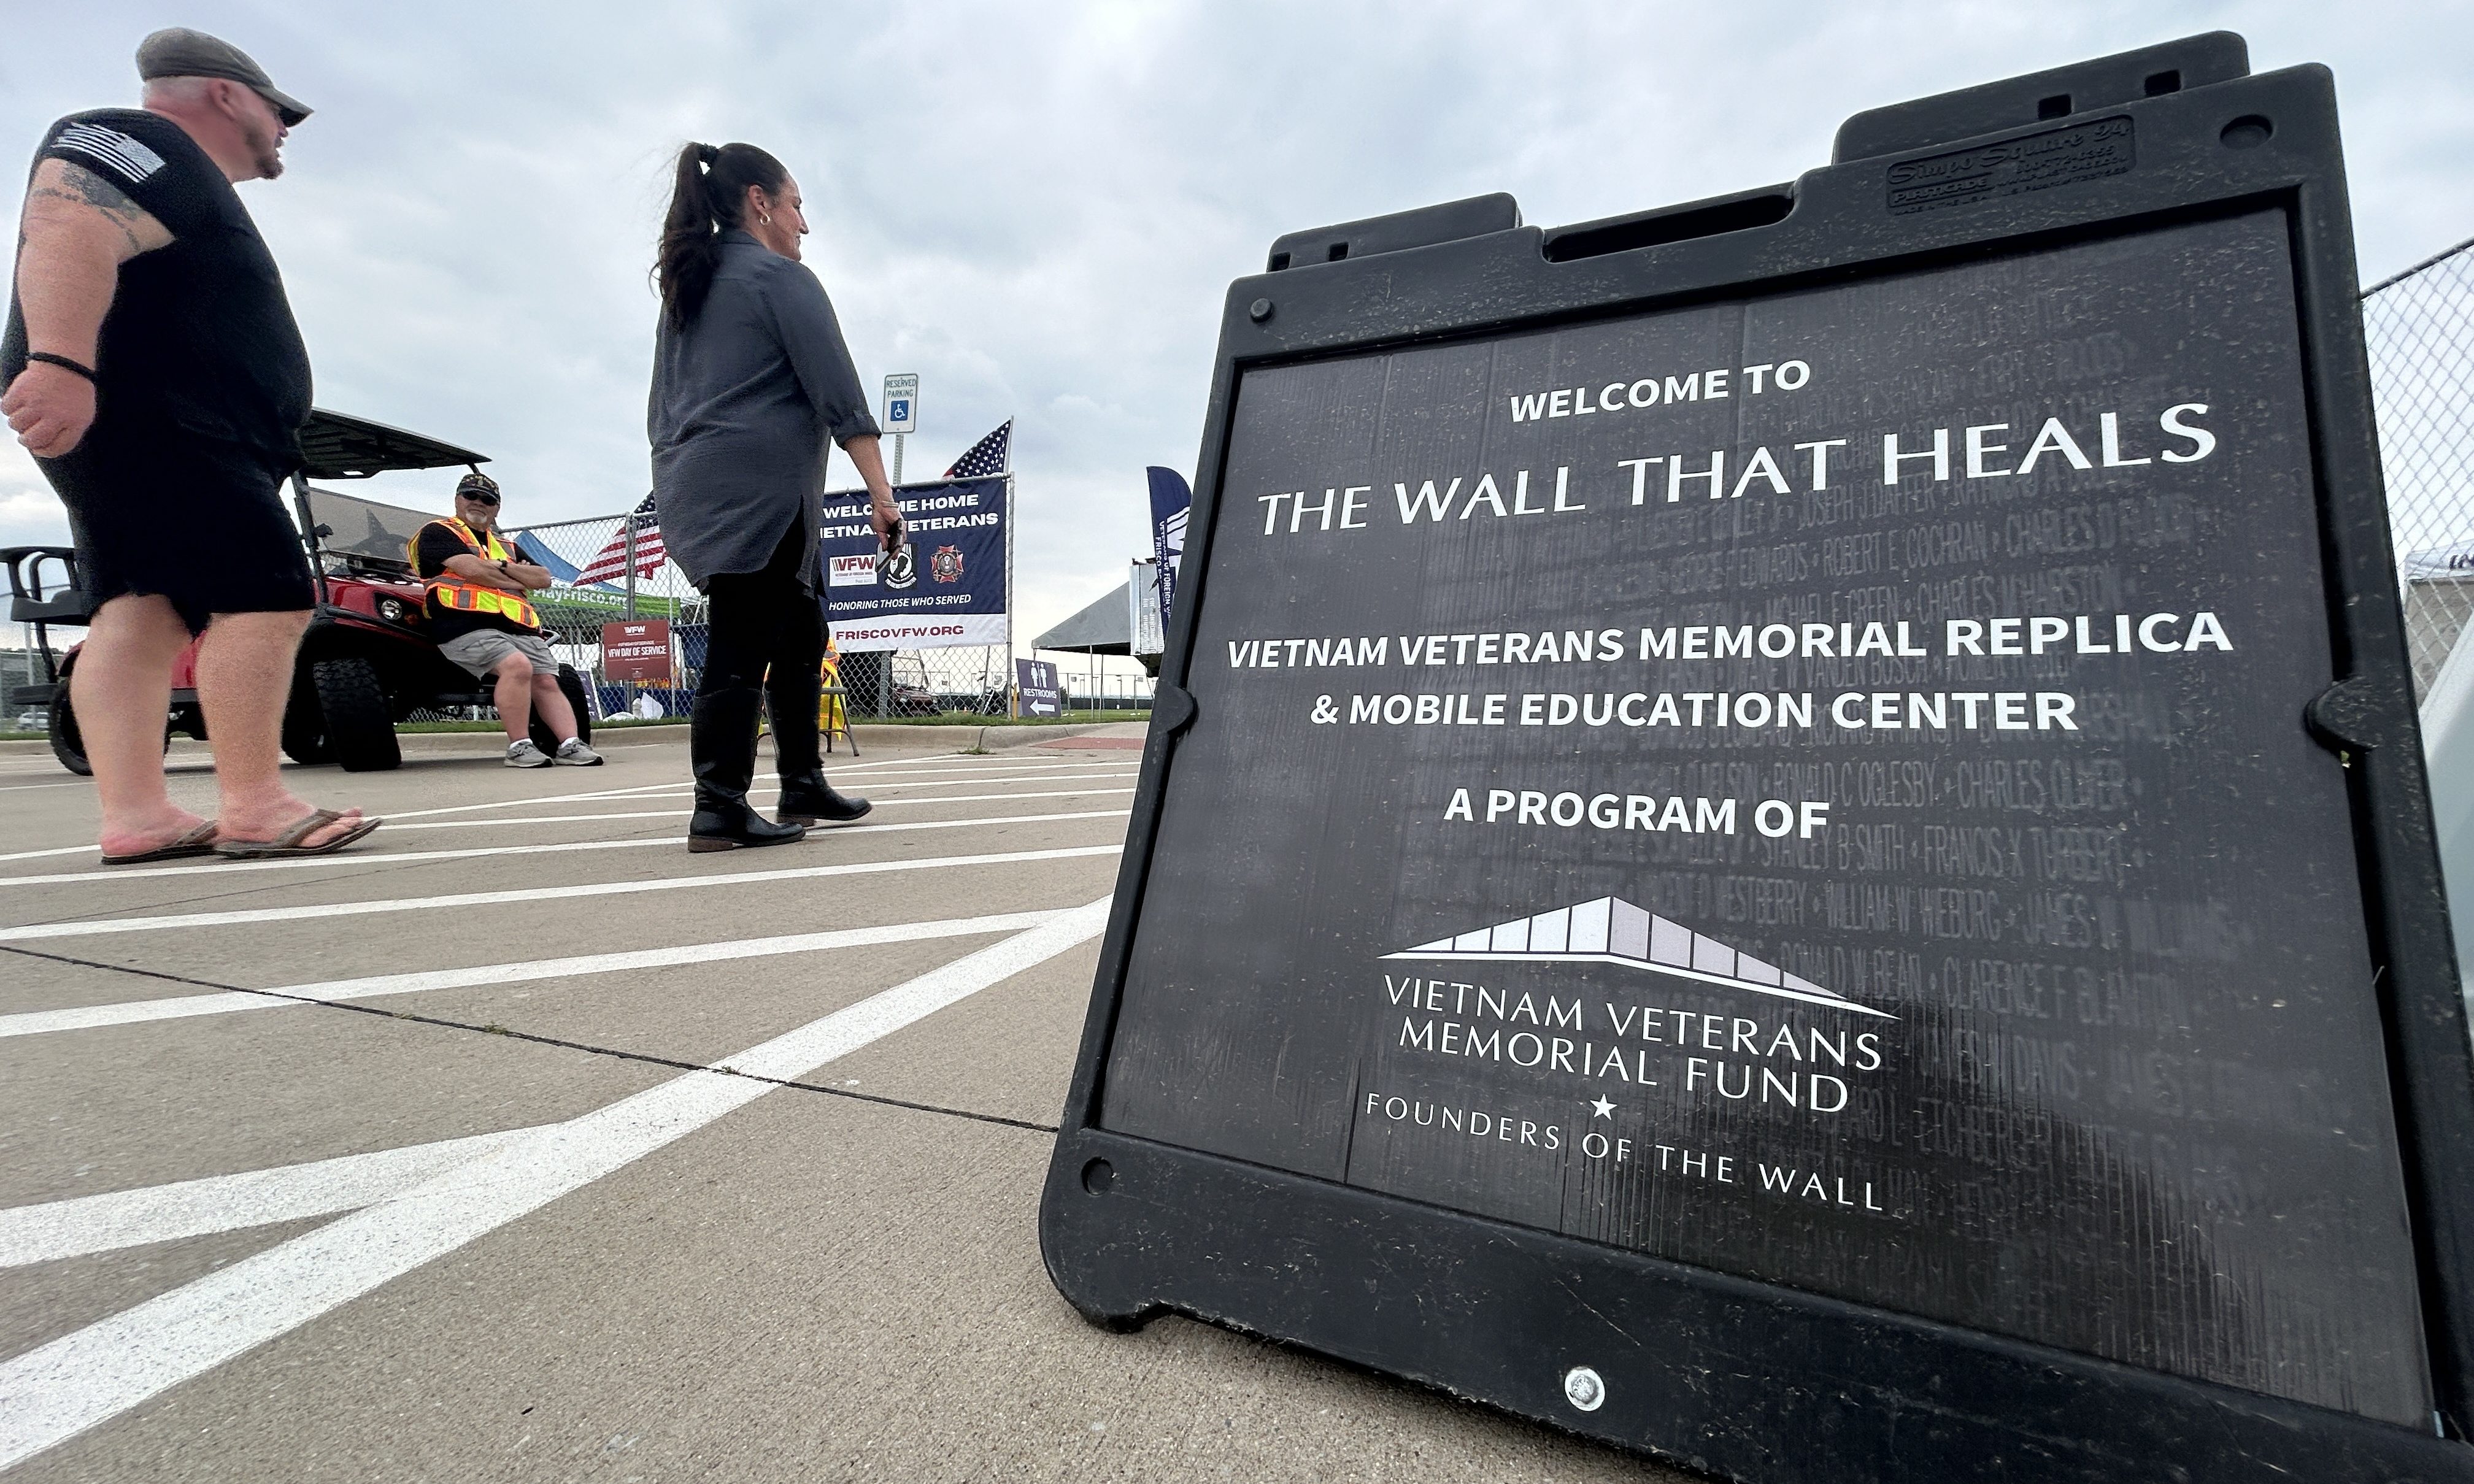 PHOTOS: The Wall That Heals in Frisco